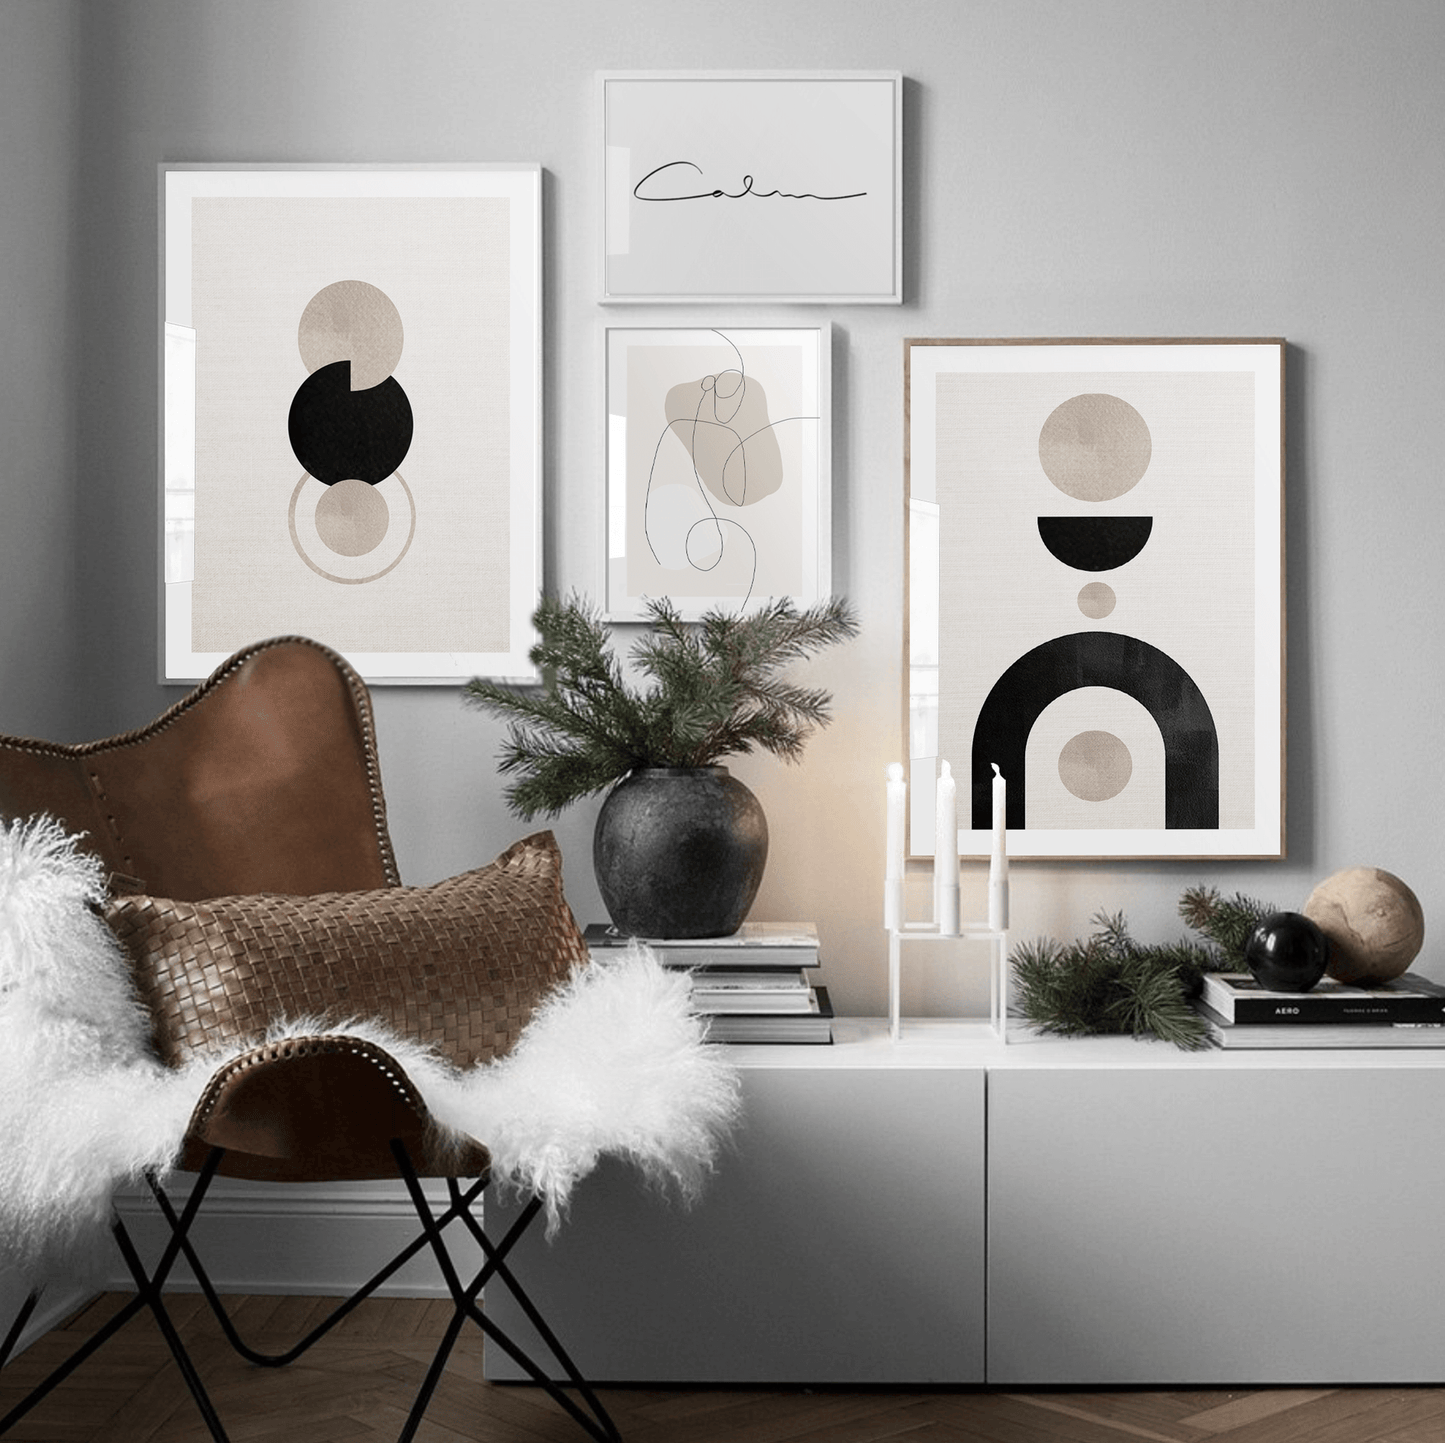 Boho abstract graphic art poster in living room